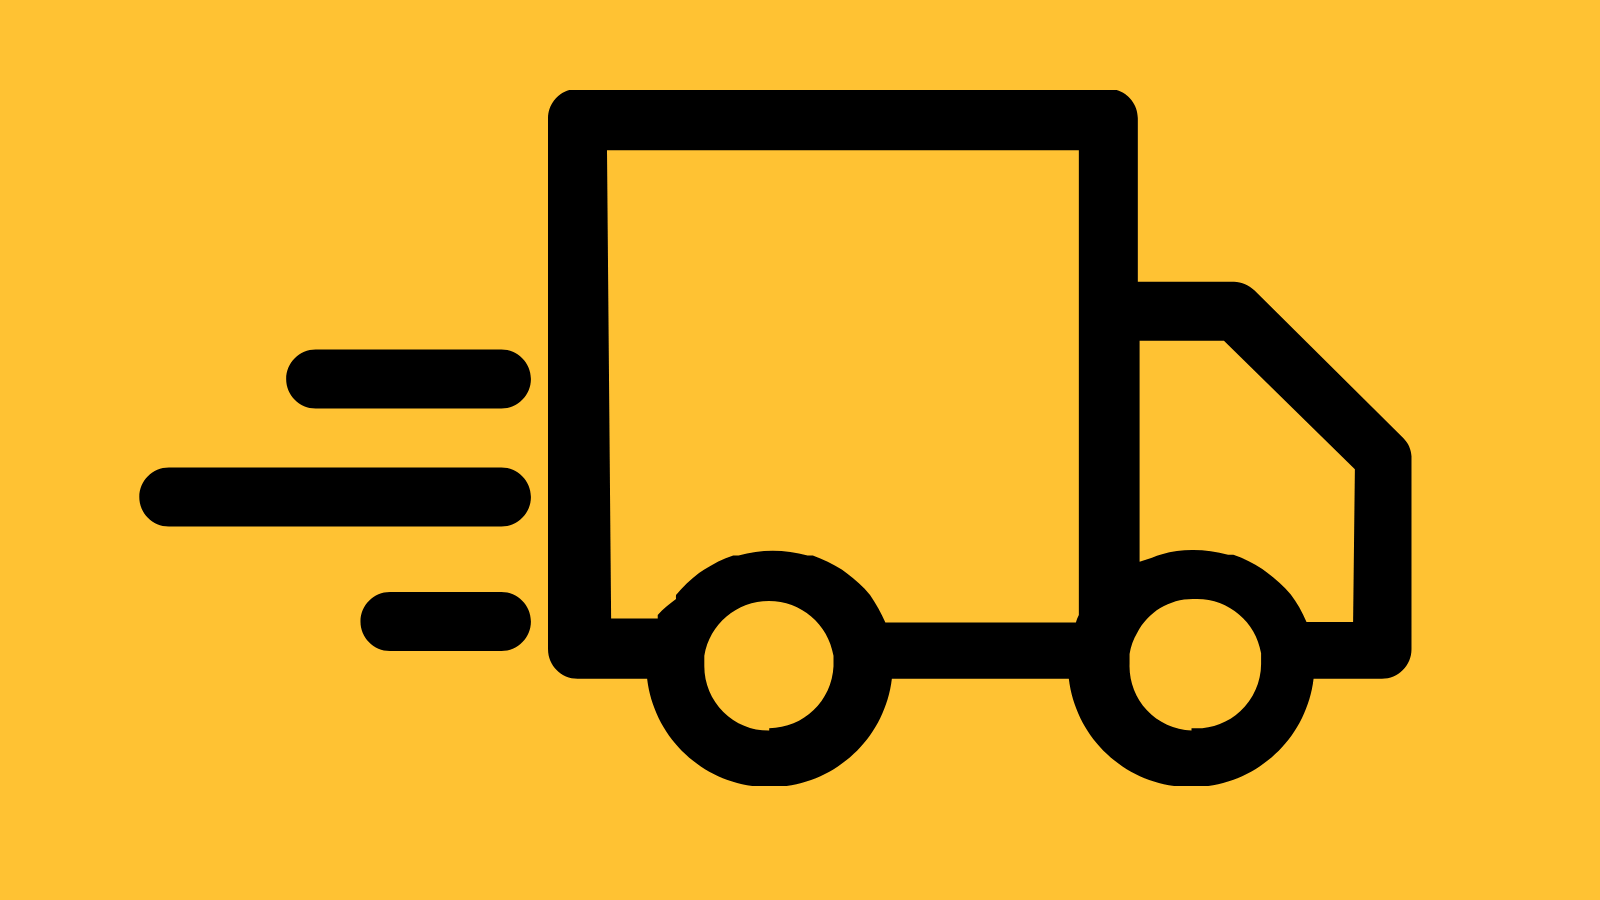 Minimalist graphic of a shipping truck